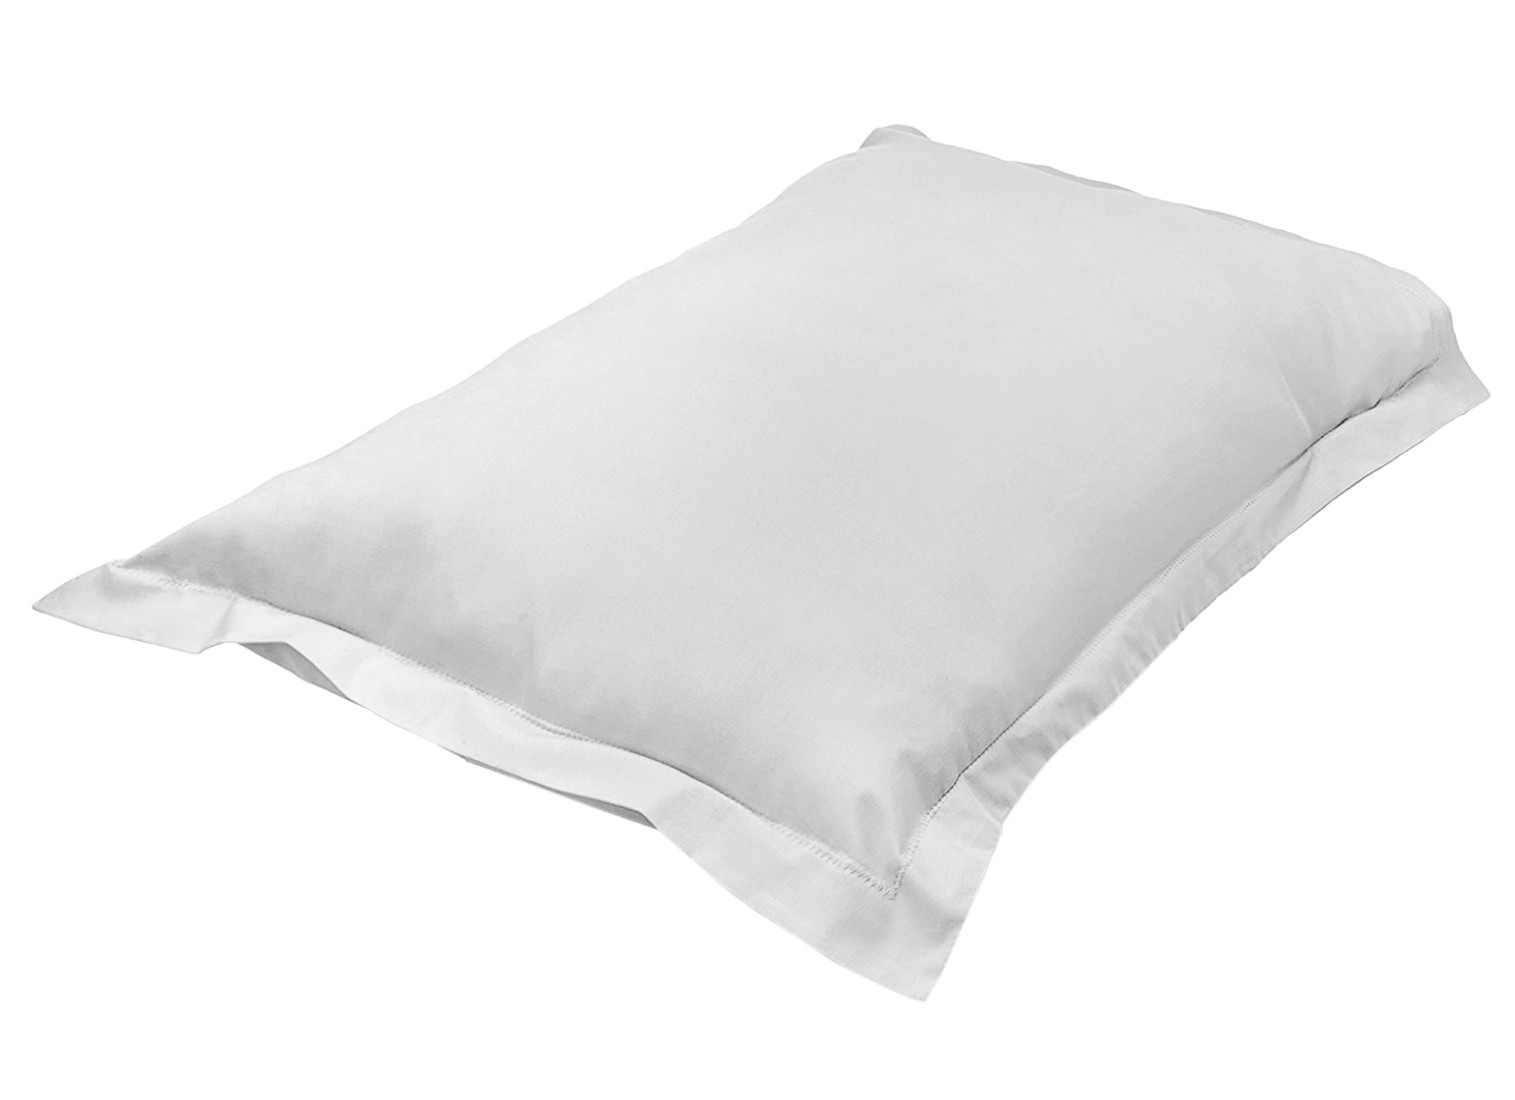 Kuber Industries Breathable & Soft Cotton Pillow Cover For Sofa, Couch, Bed - 29x20 Inch,(White)